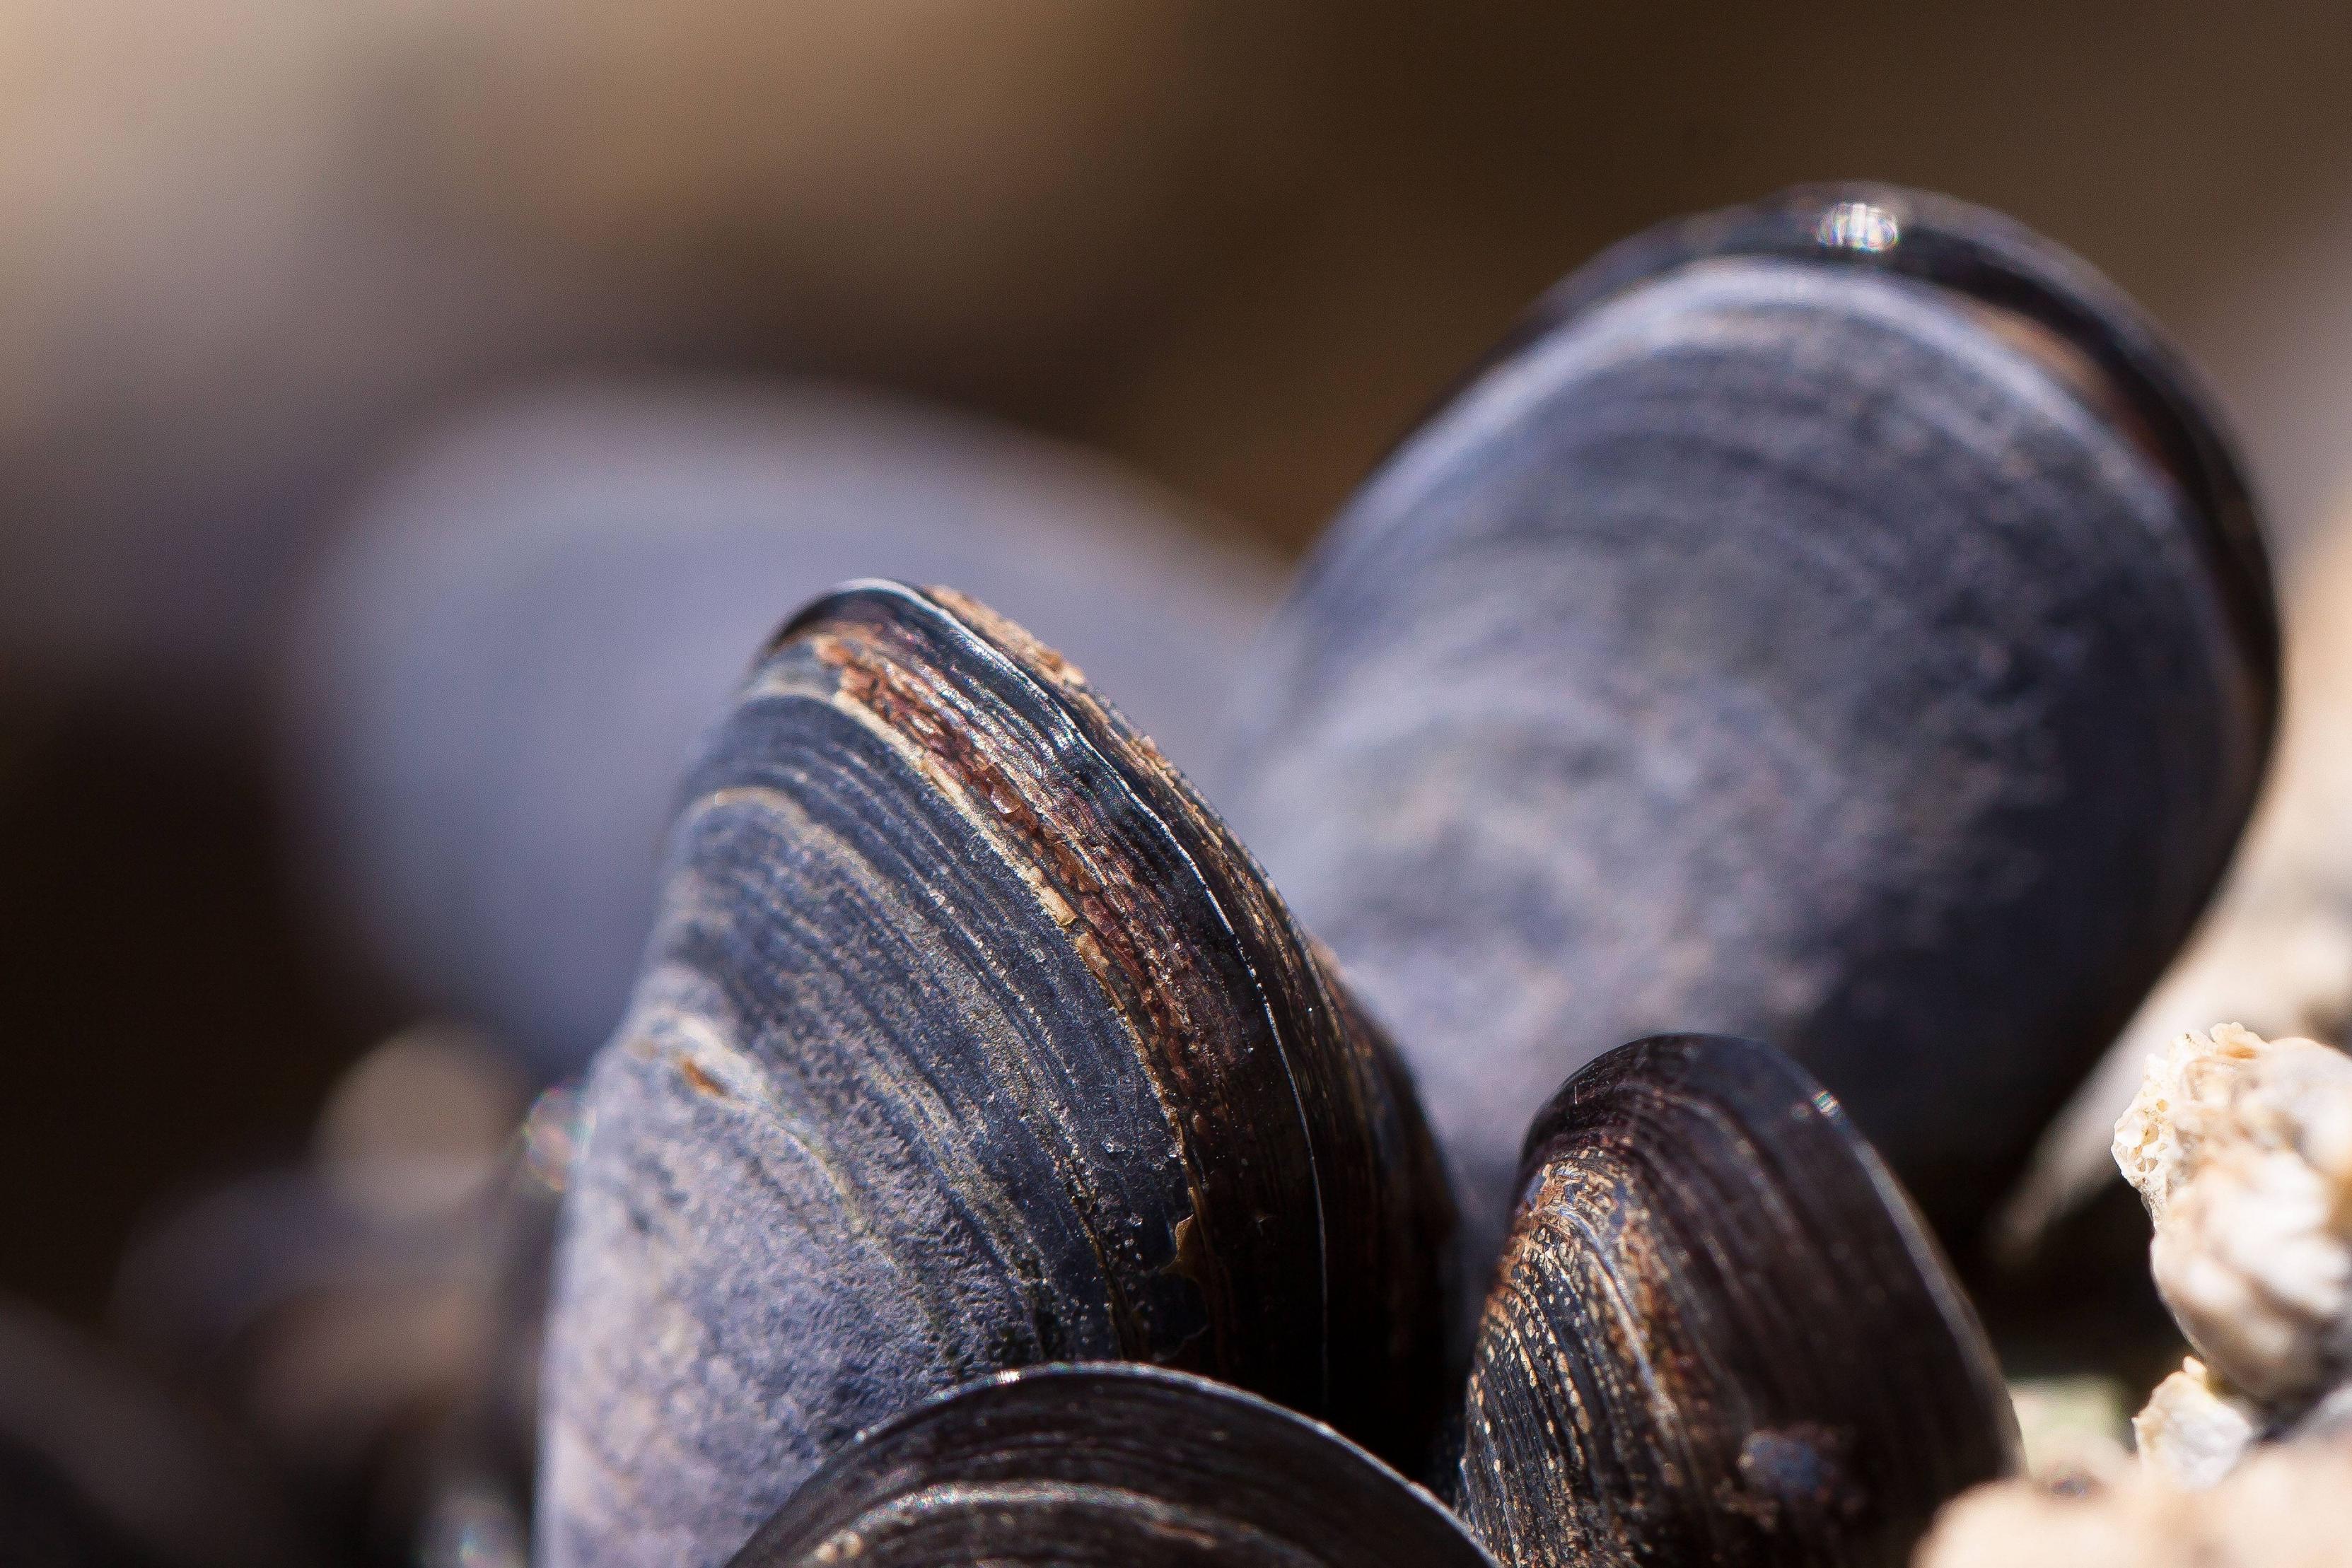 Caged Blue Mussels as Environmental Detectives